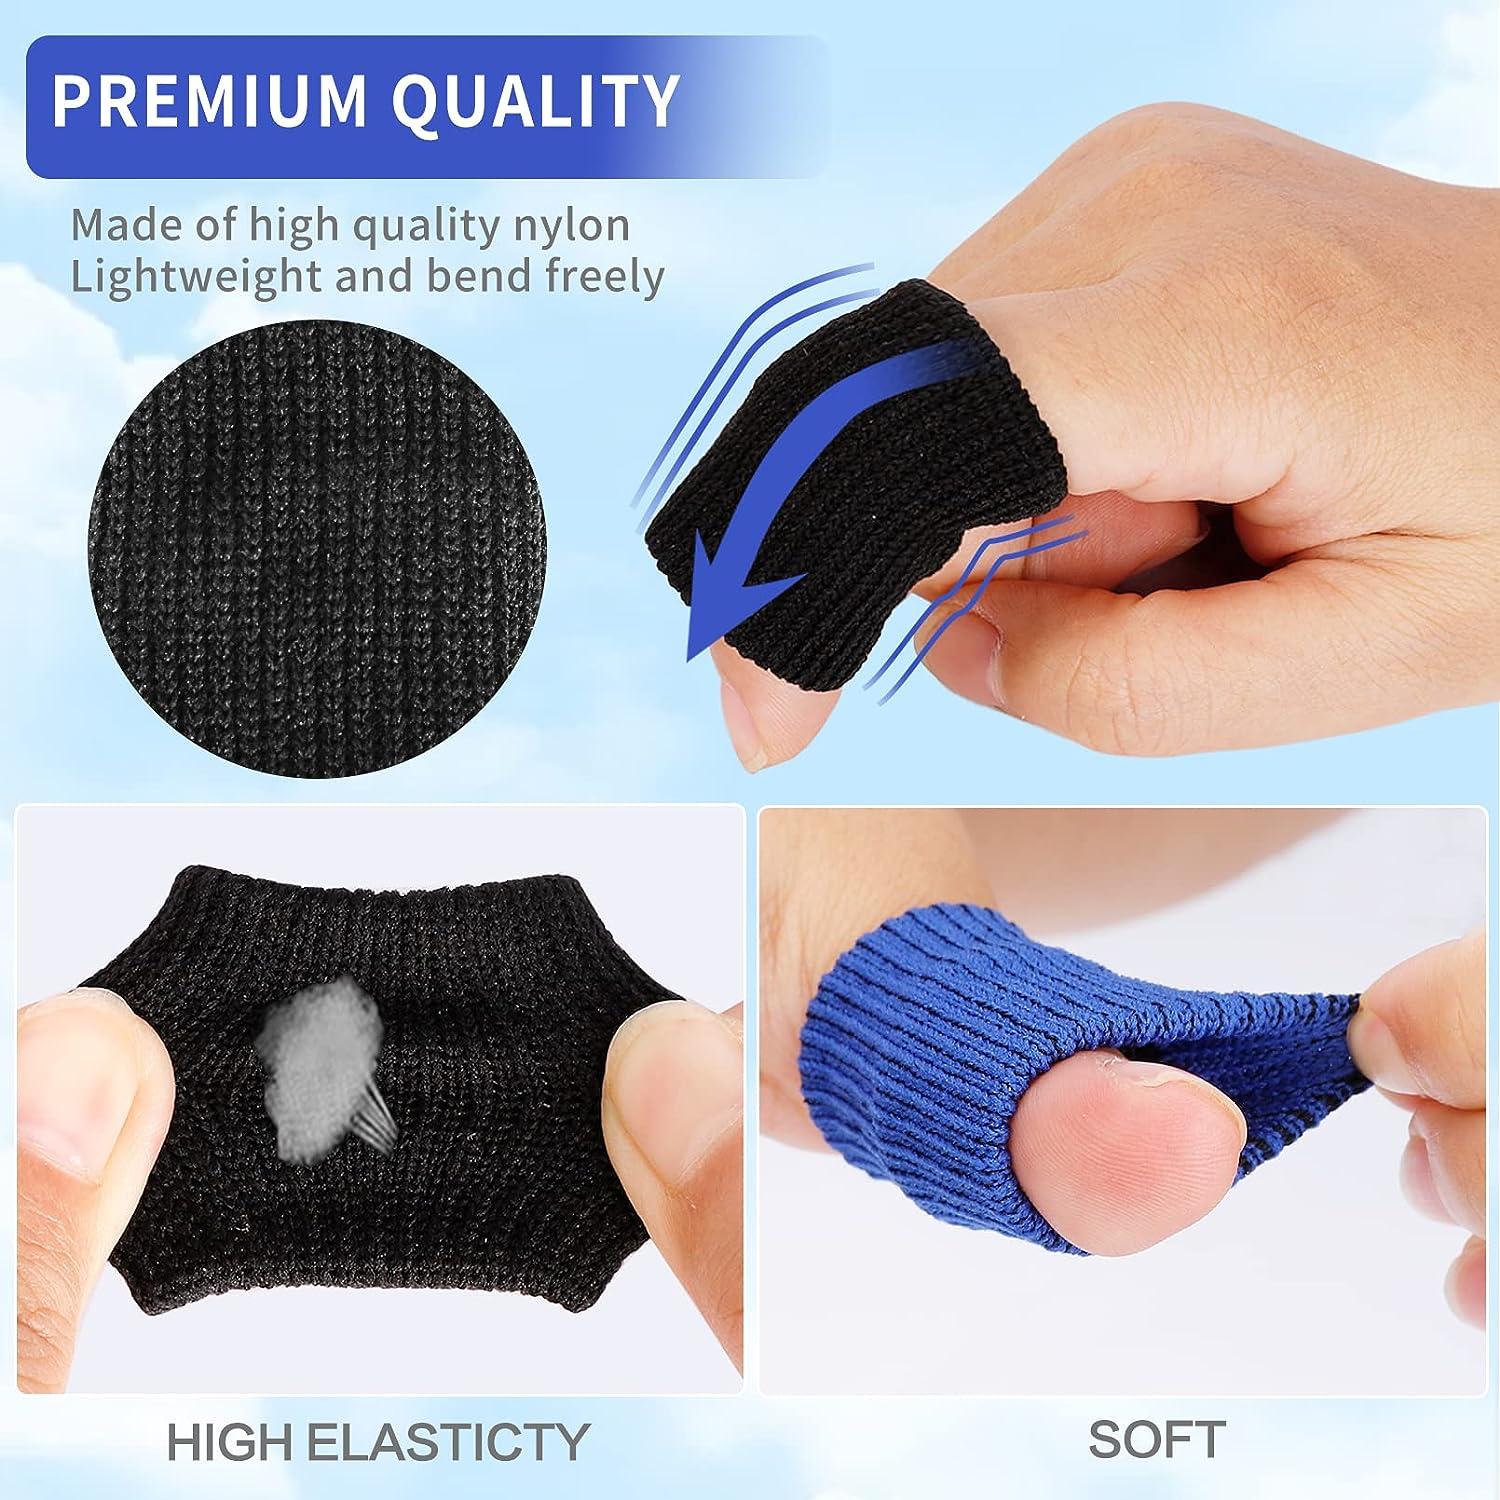 30 Pieces Finger Sleeves Elastic Compression Protector with 1